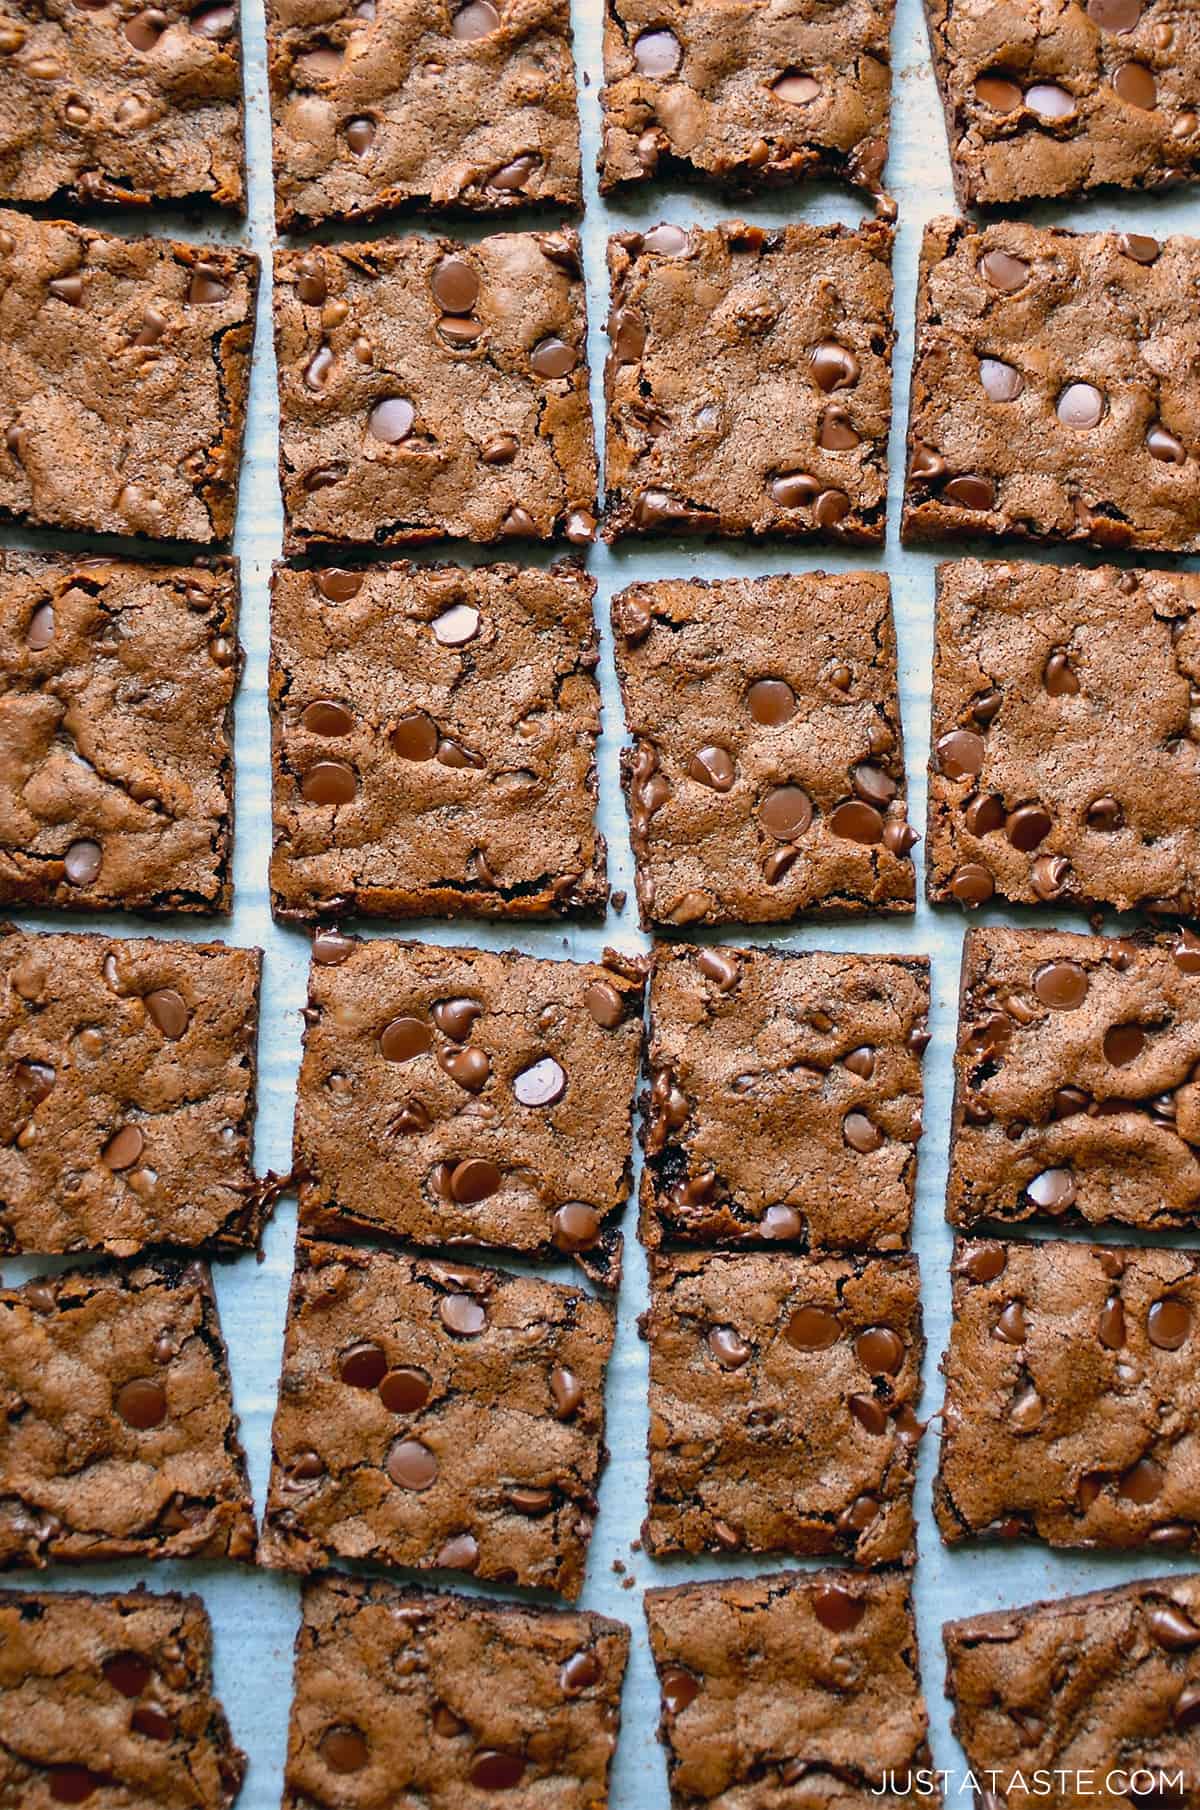 Four rows of brownie bark studded with chocolate chips.